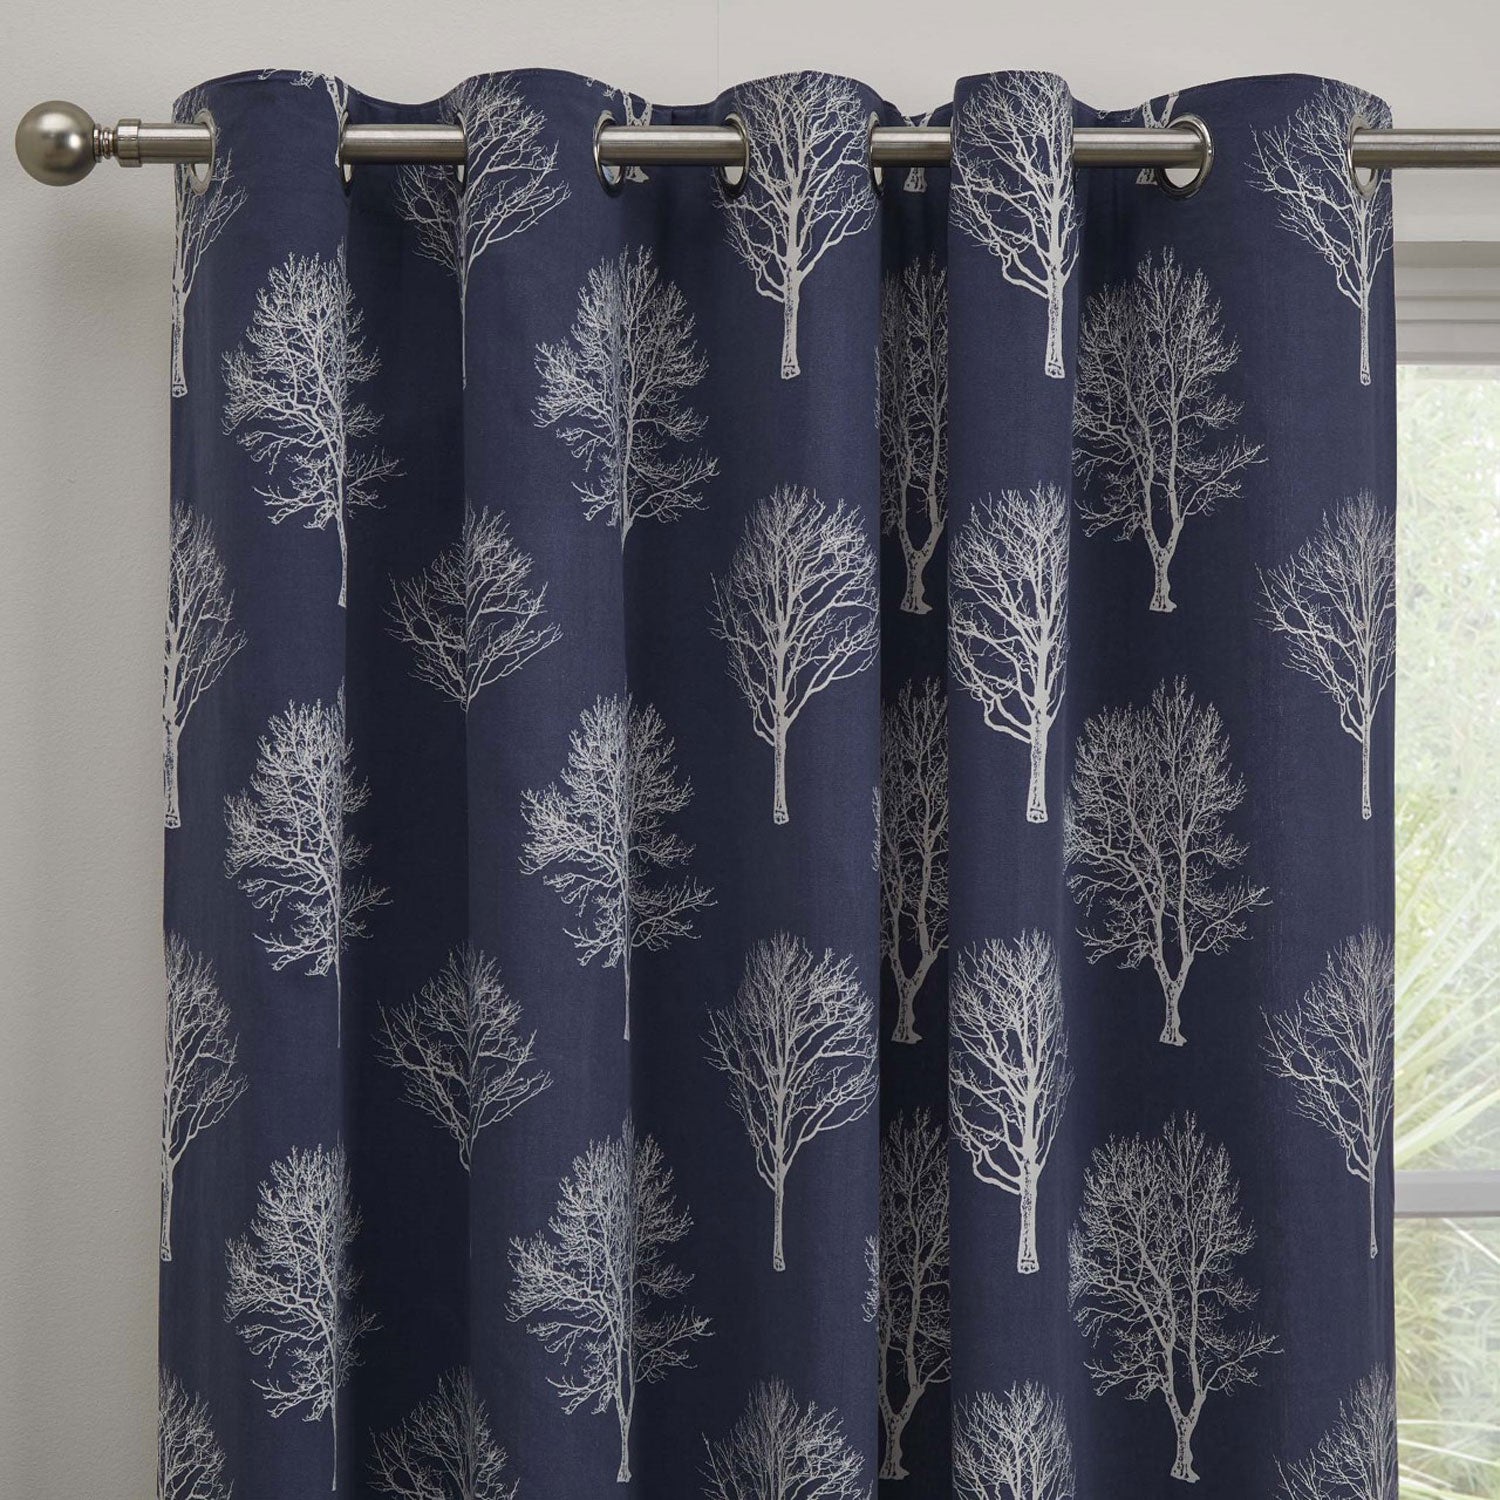 The Home Bedroom Woodland Trees Eyelet Curtains - Navy 2 Shaws Department Stores